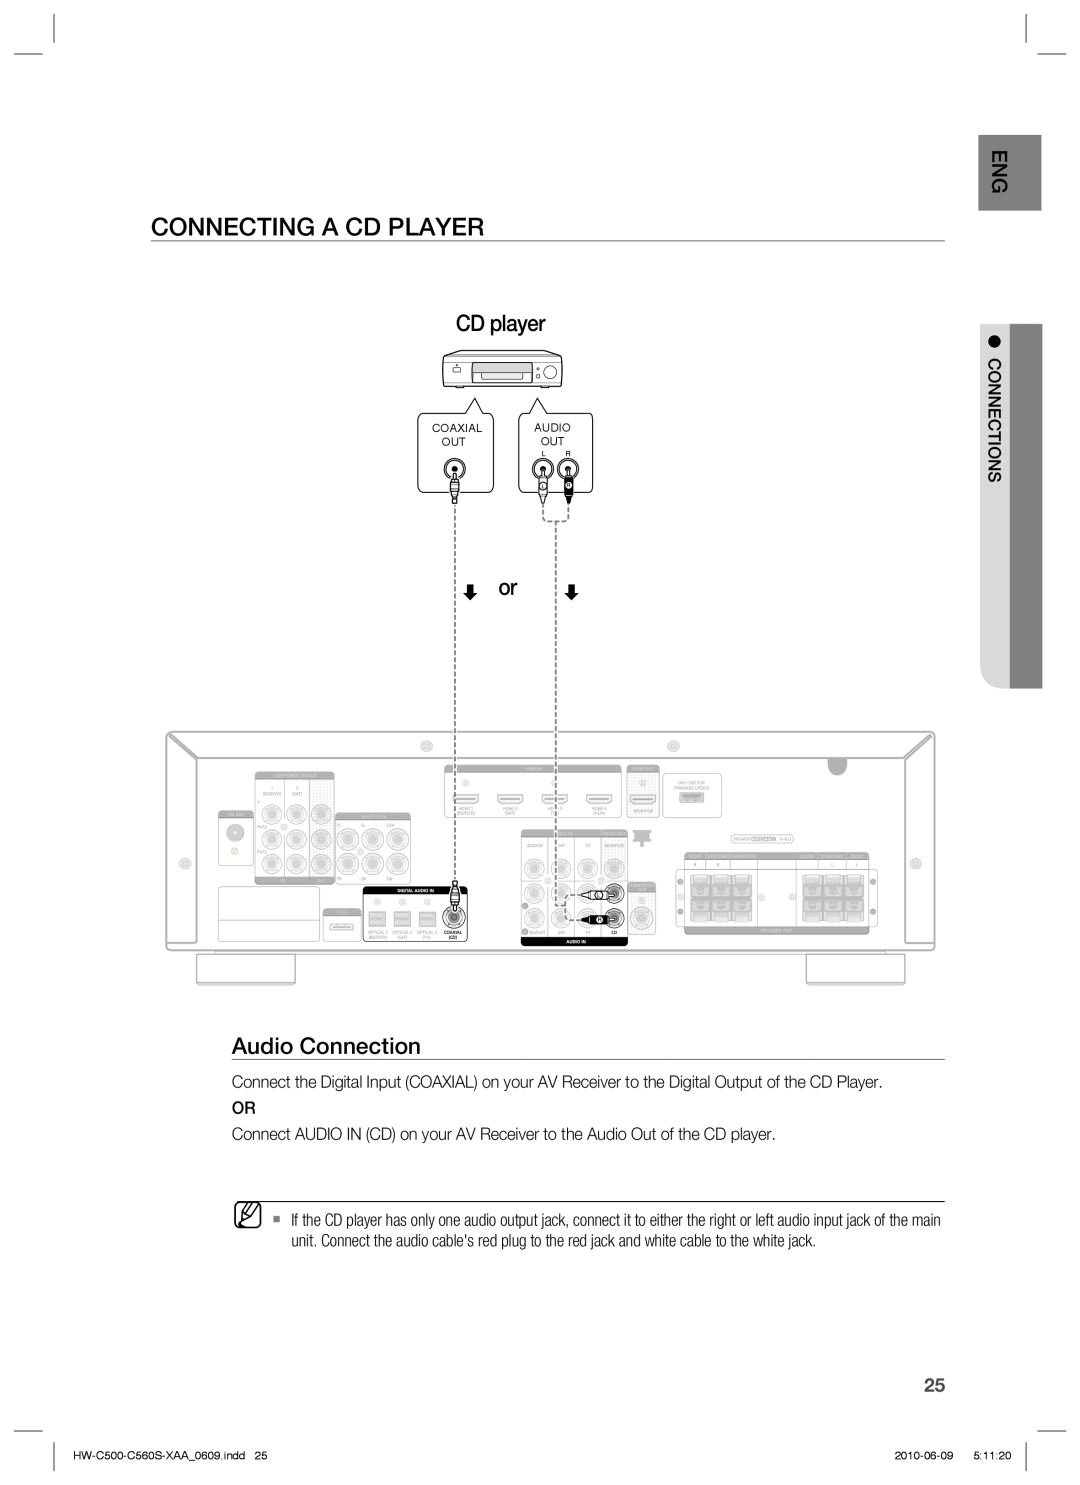 Samsung HW-C560S, HW-C500 user manual Connecting A Cd Player, CD player, Audio Connection 